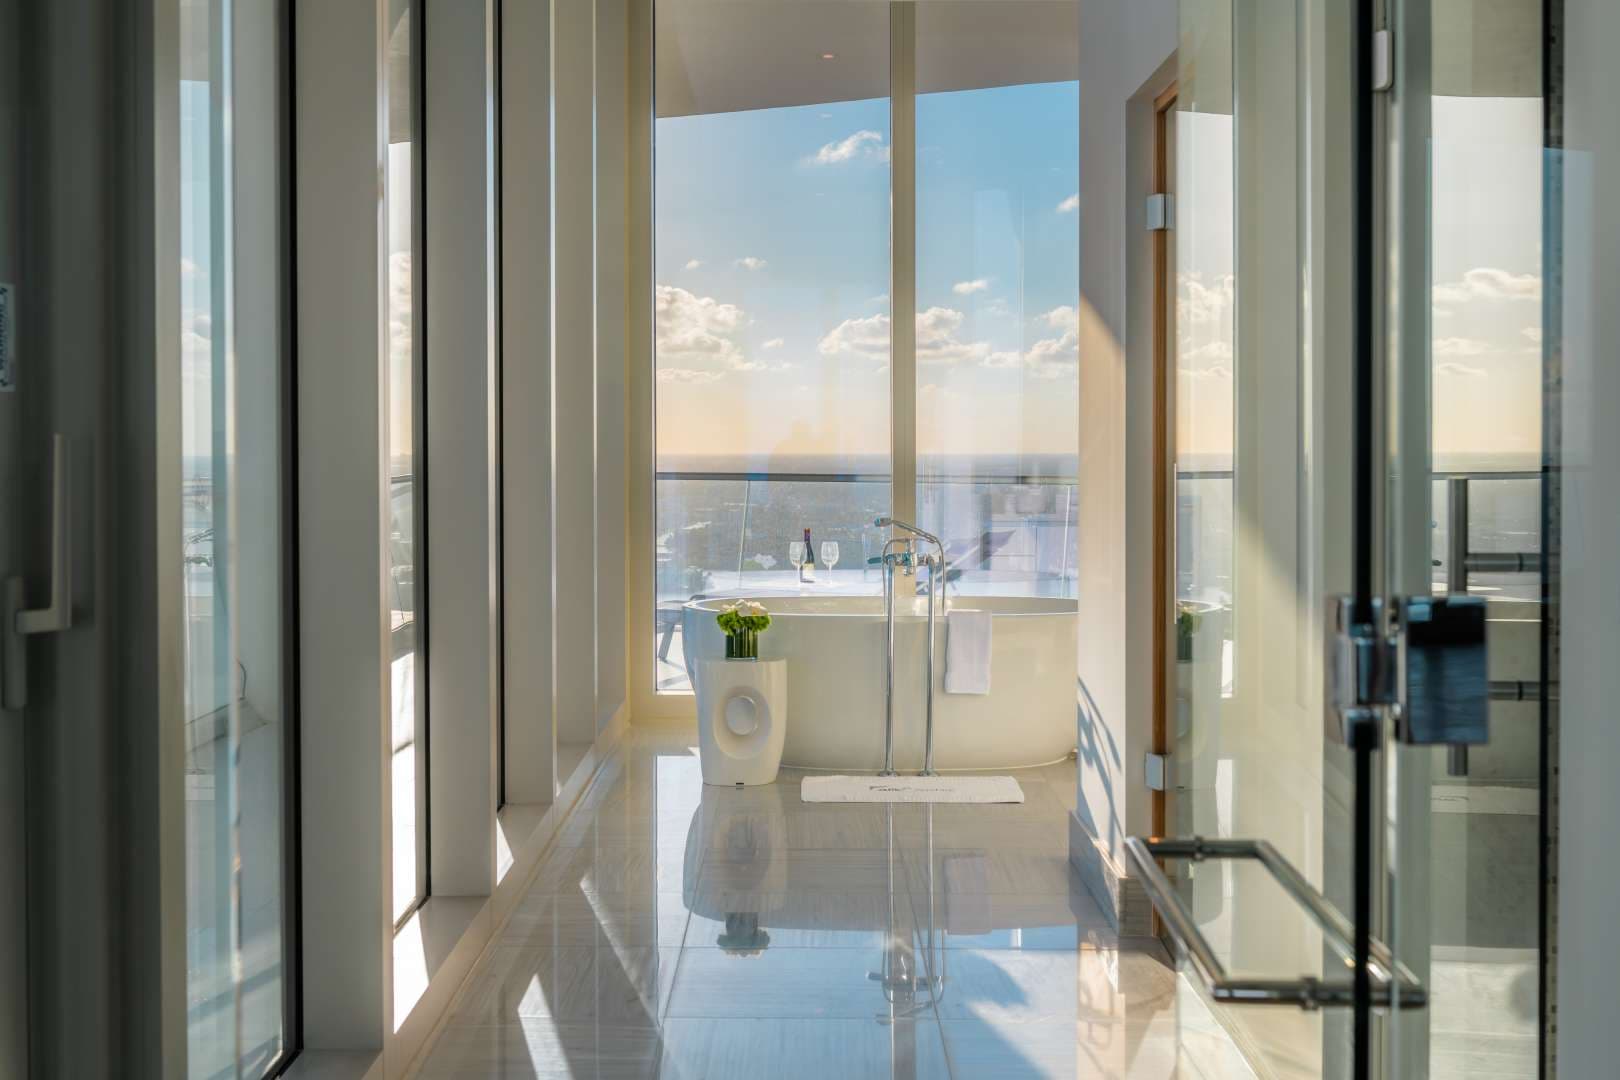 6 Bedroom Penthouse For Sale Miami Lp10448 2fde7352bf88f400.jpg